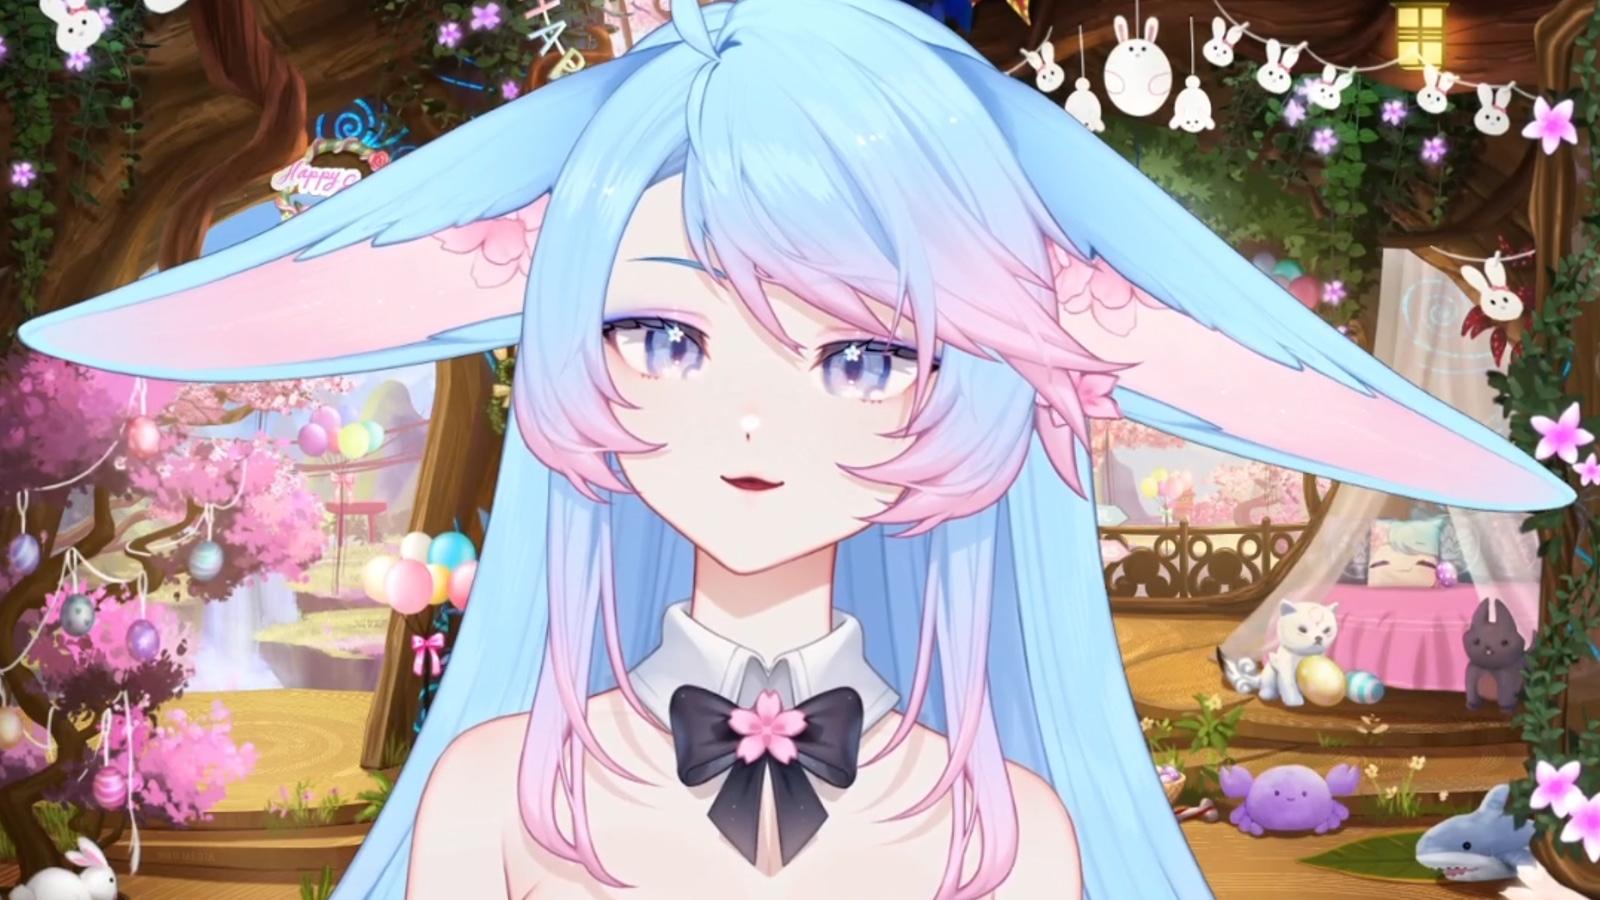 vtuber silvervale streaming on twitch answering fans' questions